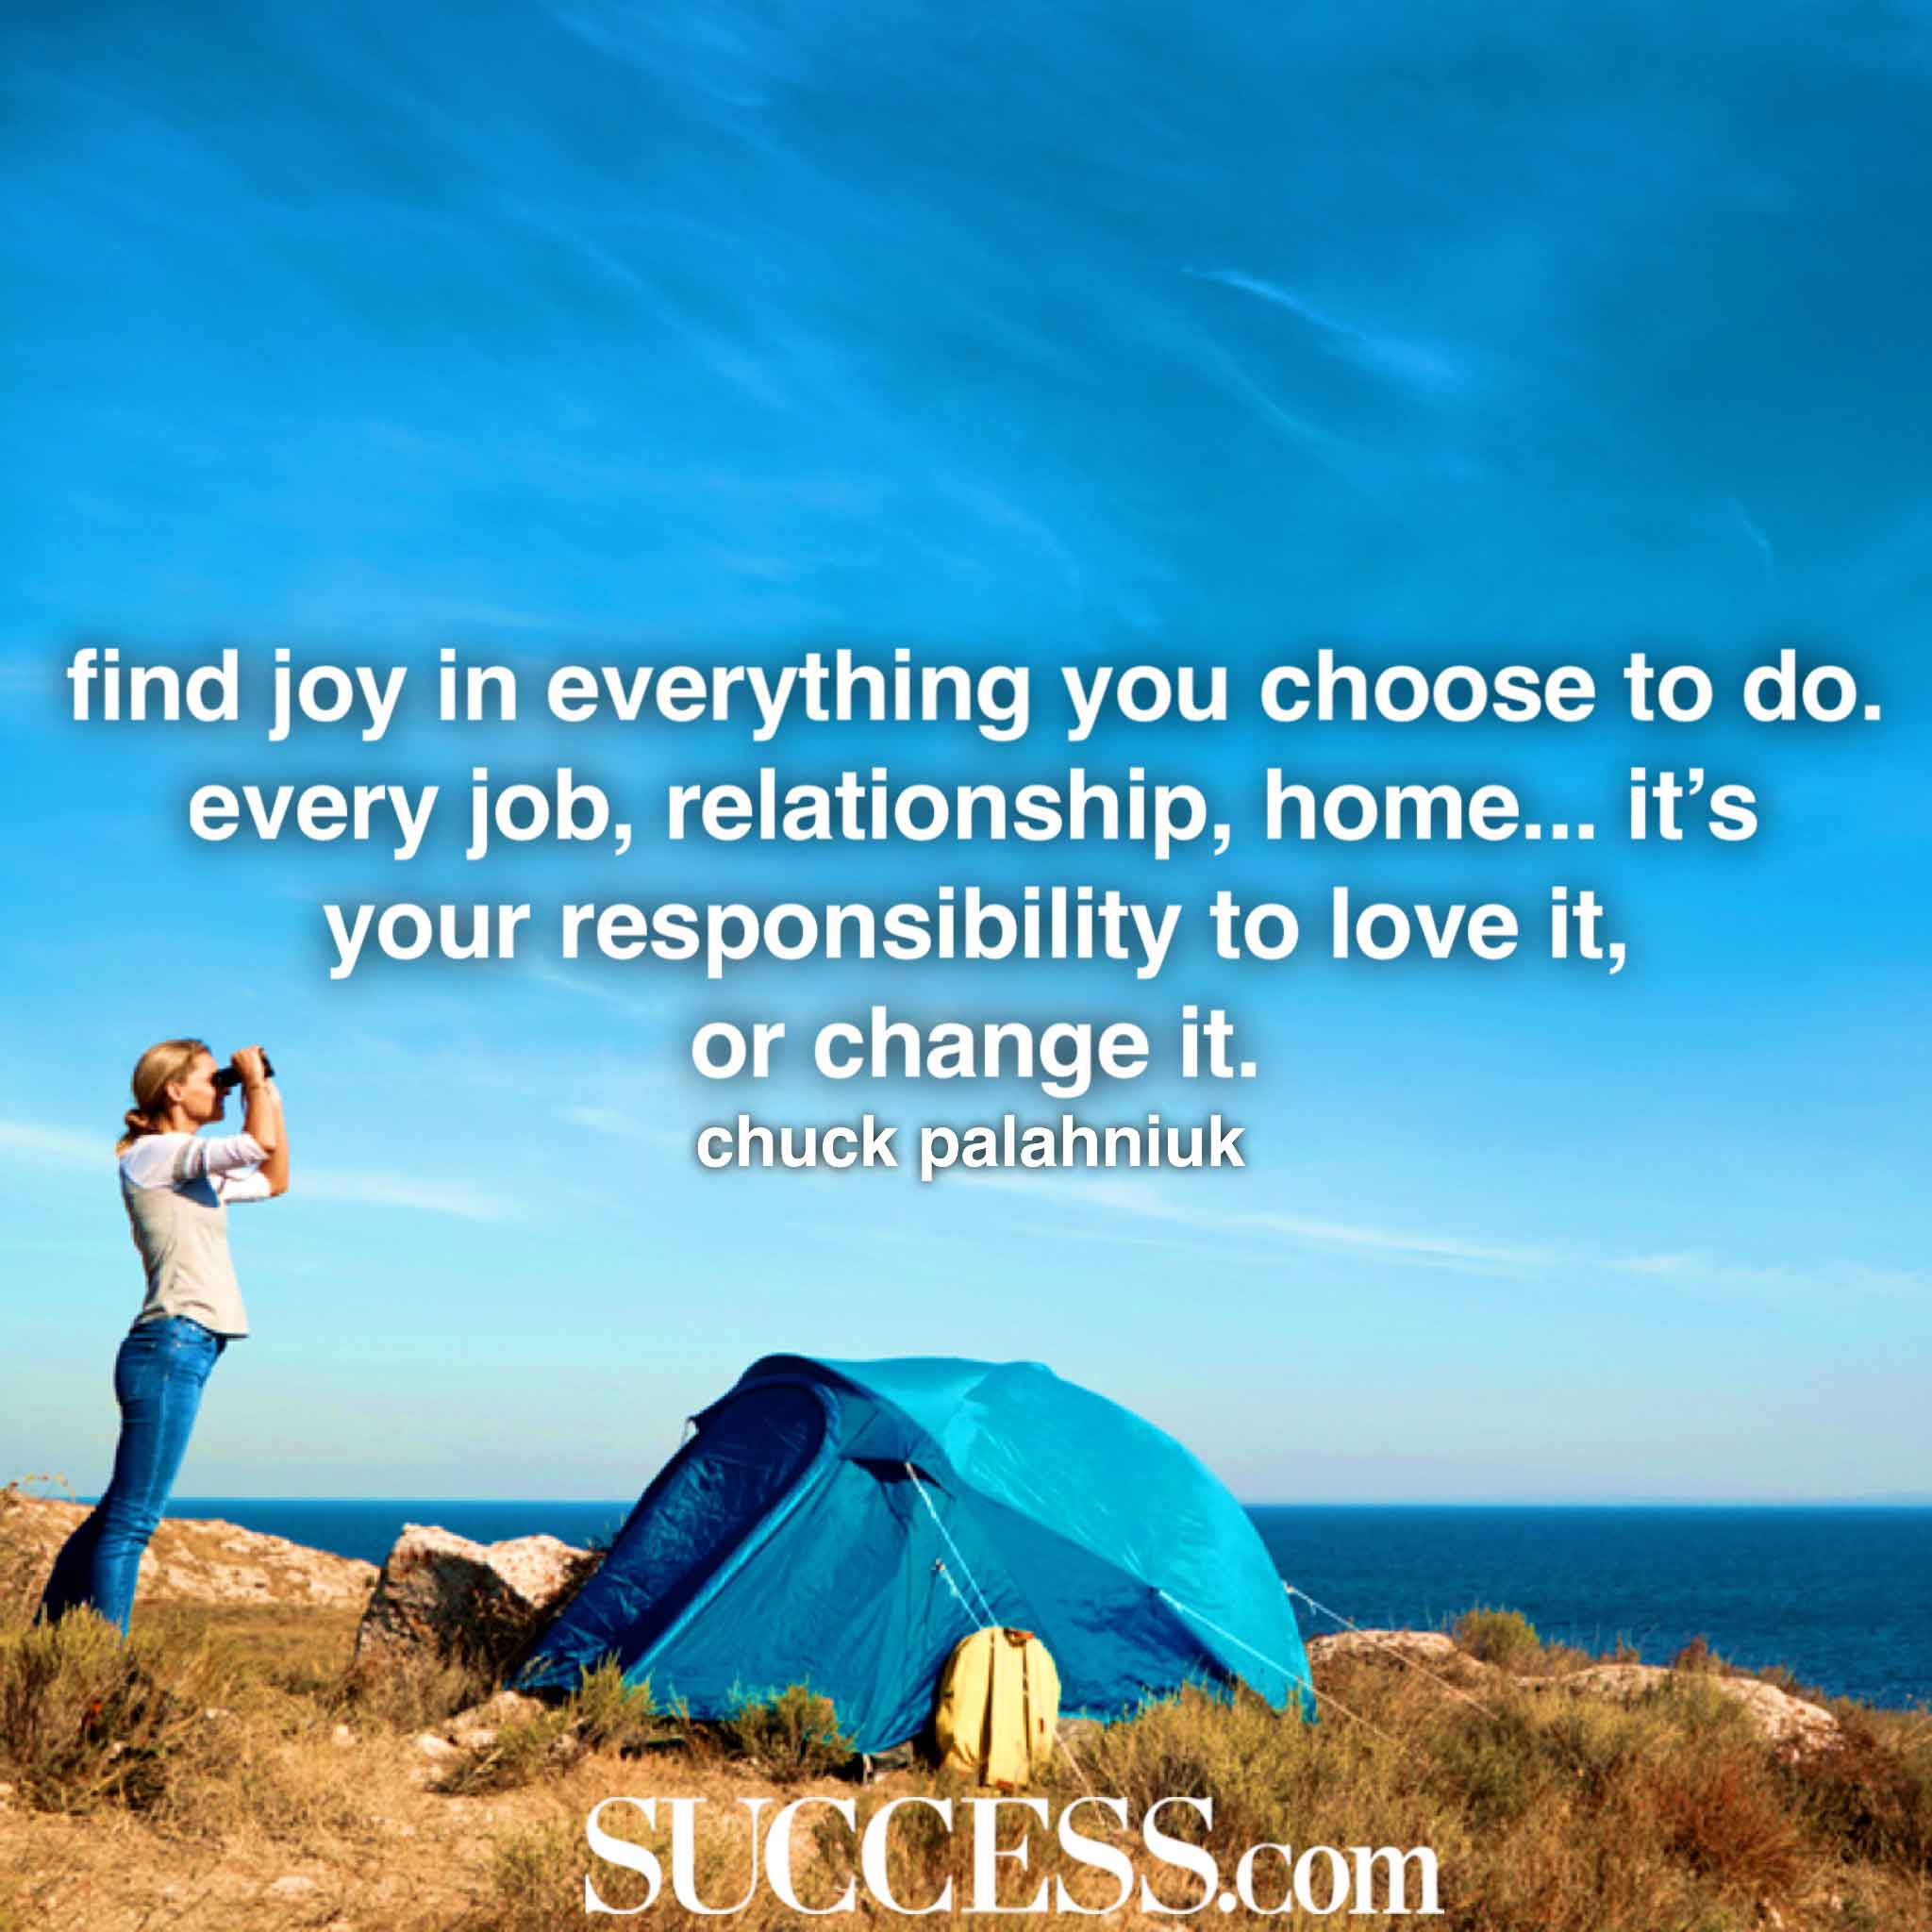 “Find joy in everything you choose to do. Every job relationship home... it’s your responsibility to love it or change it.” —Chuck Palahniuk-hoogbegaafd